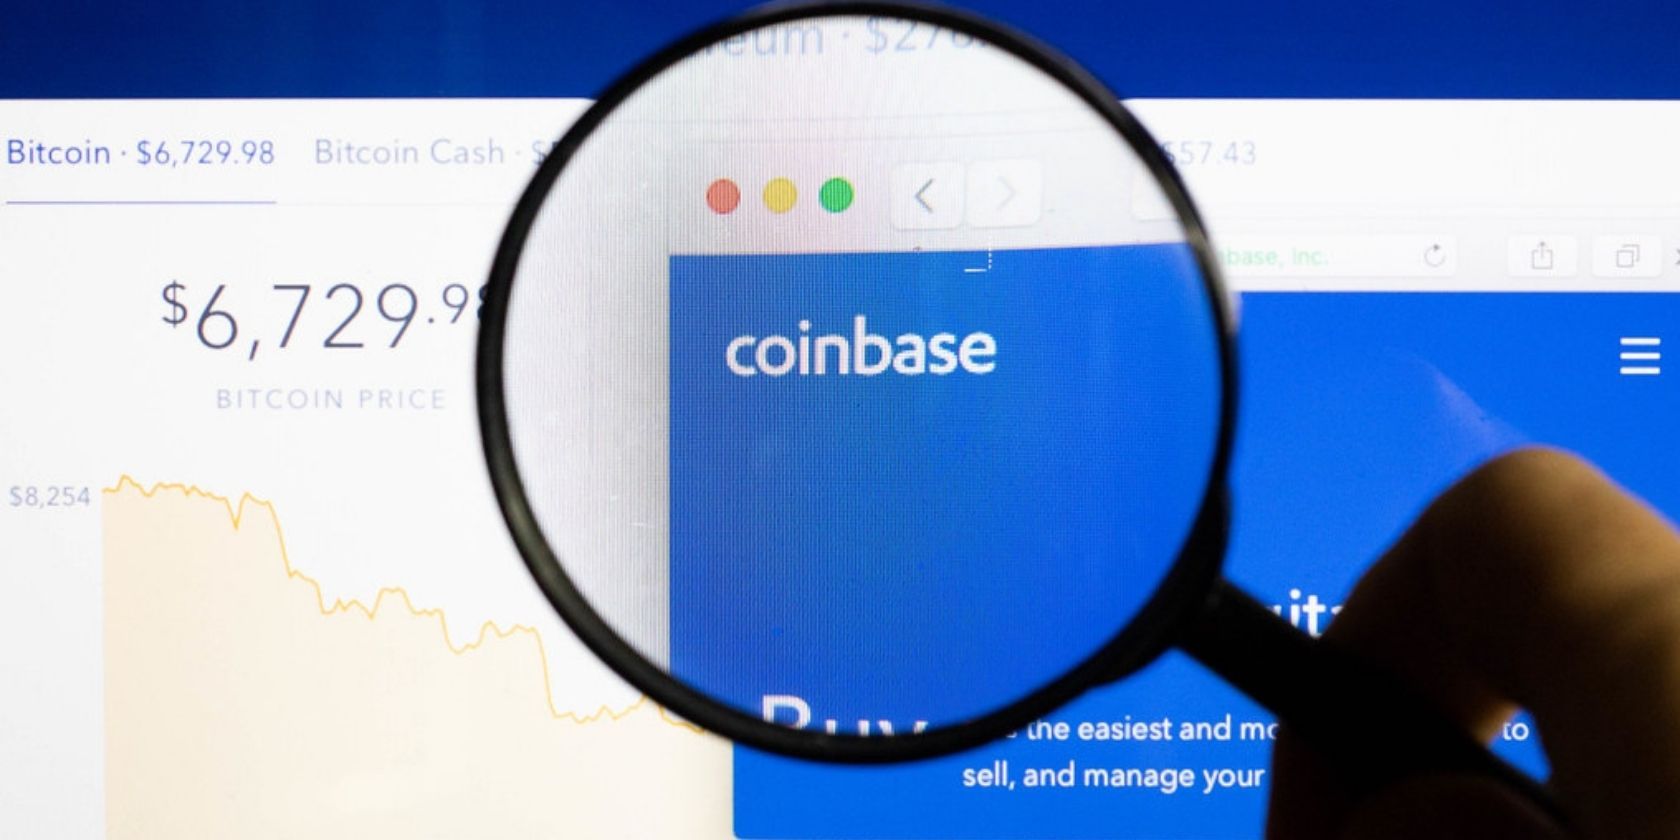 coinbase website behind magnifying glass